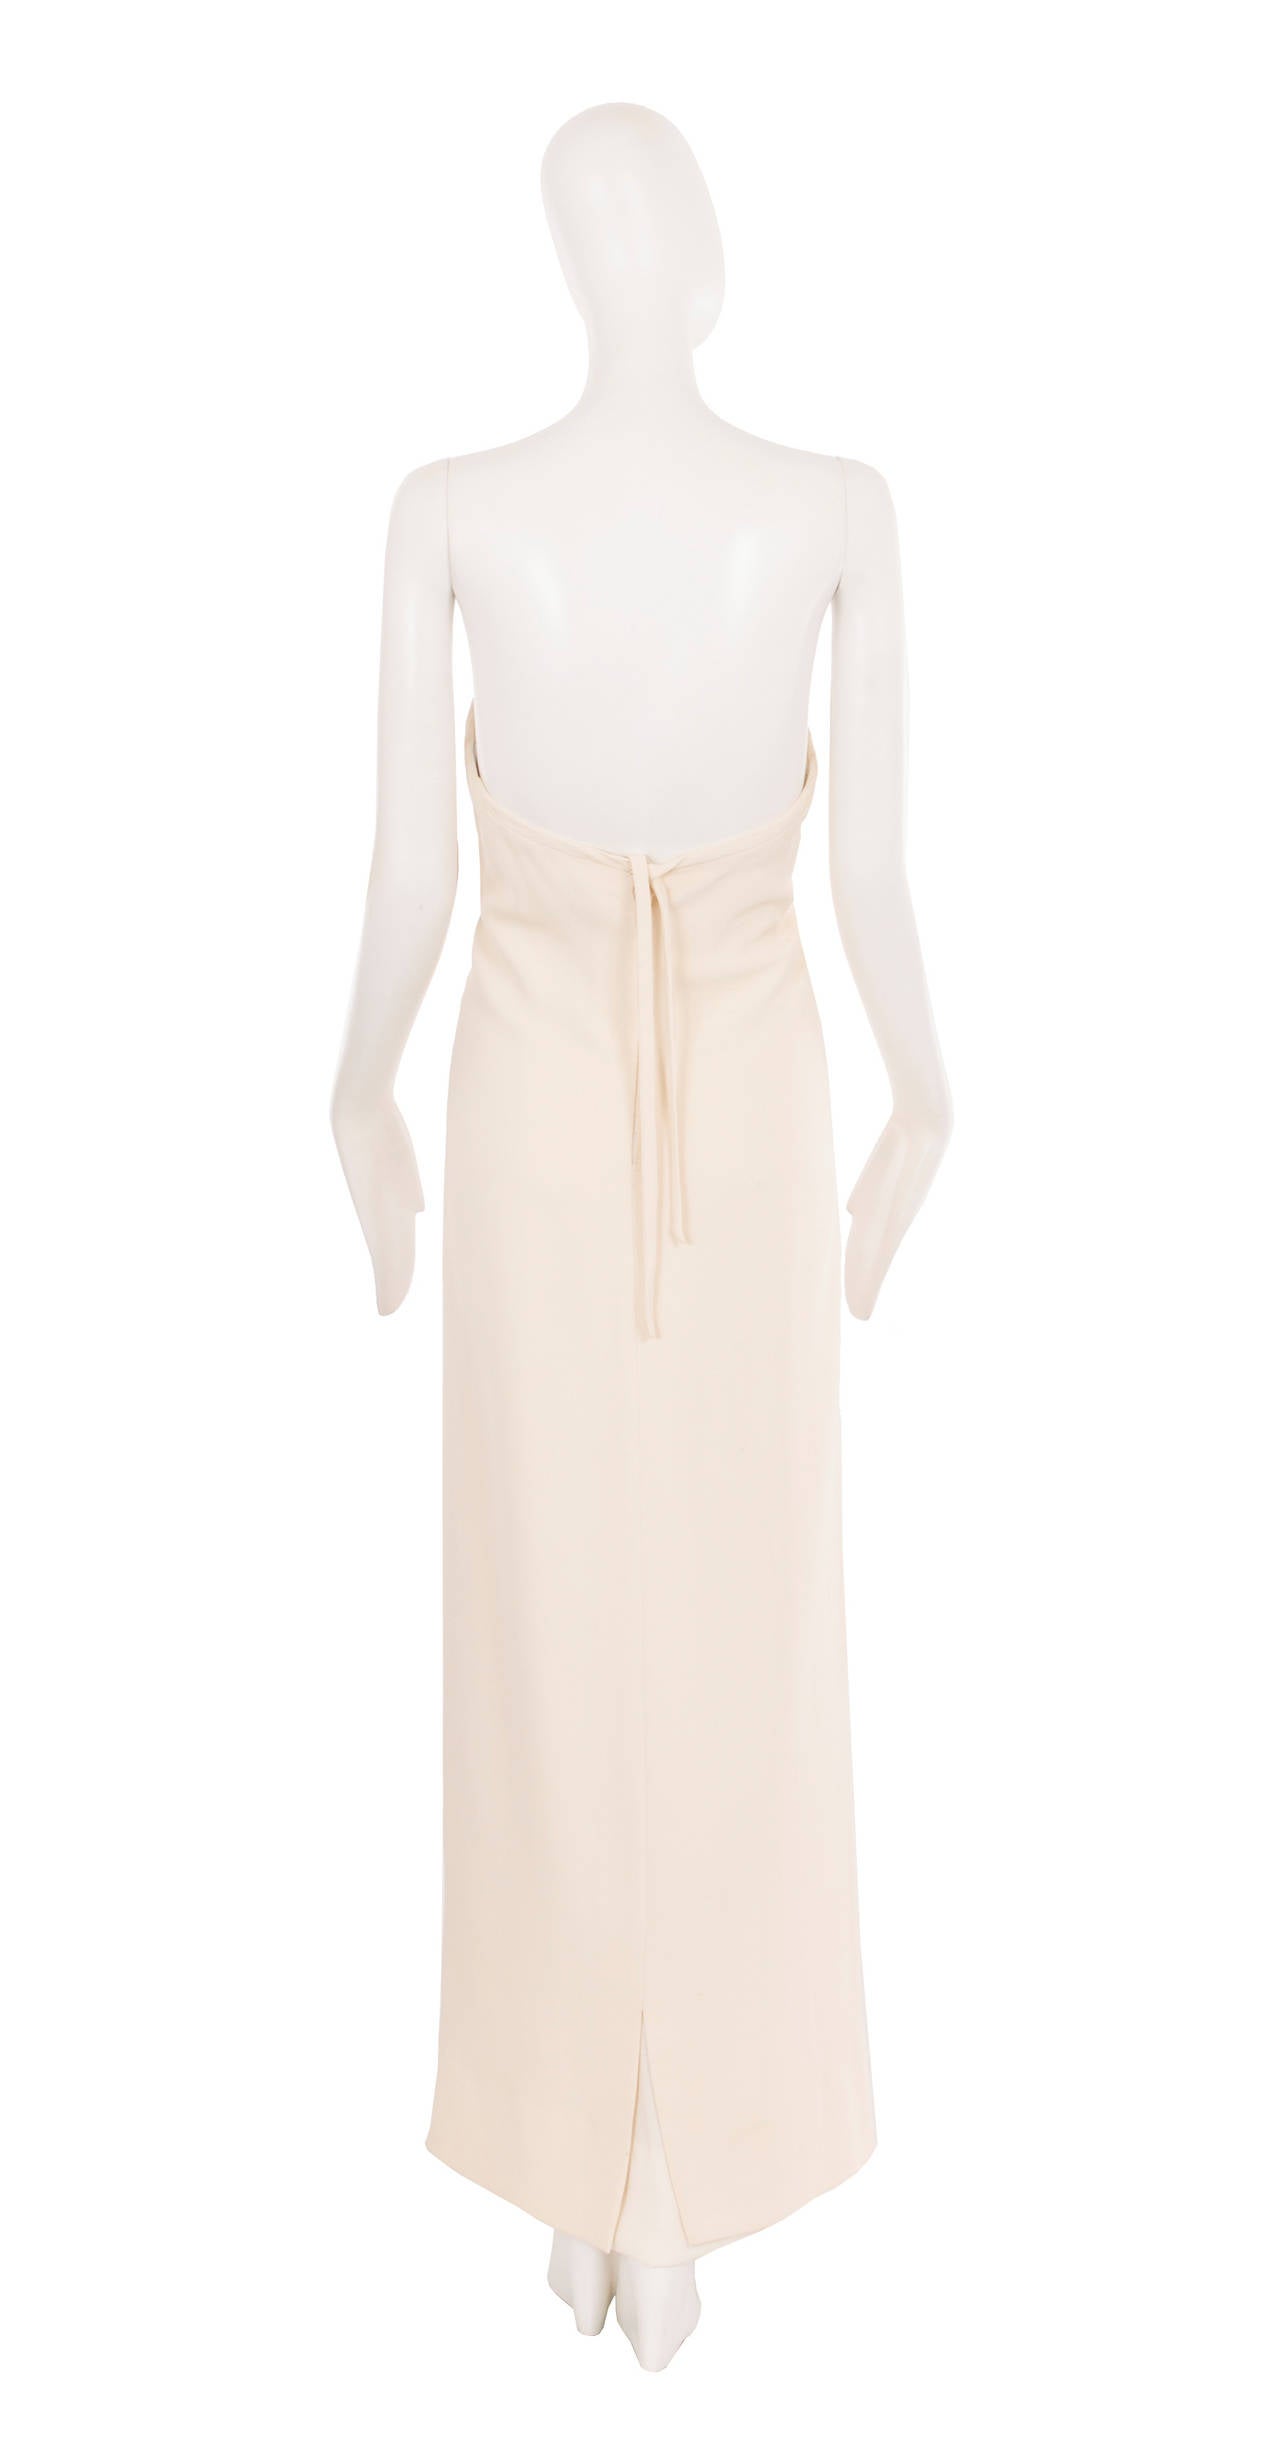 Jacques Griffe Haute Couture Ivory Silk Dress, circa 1960 In Good Condition For Sale In London, GB